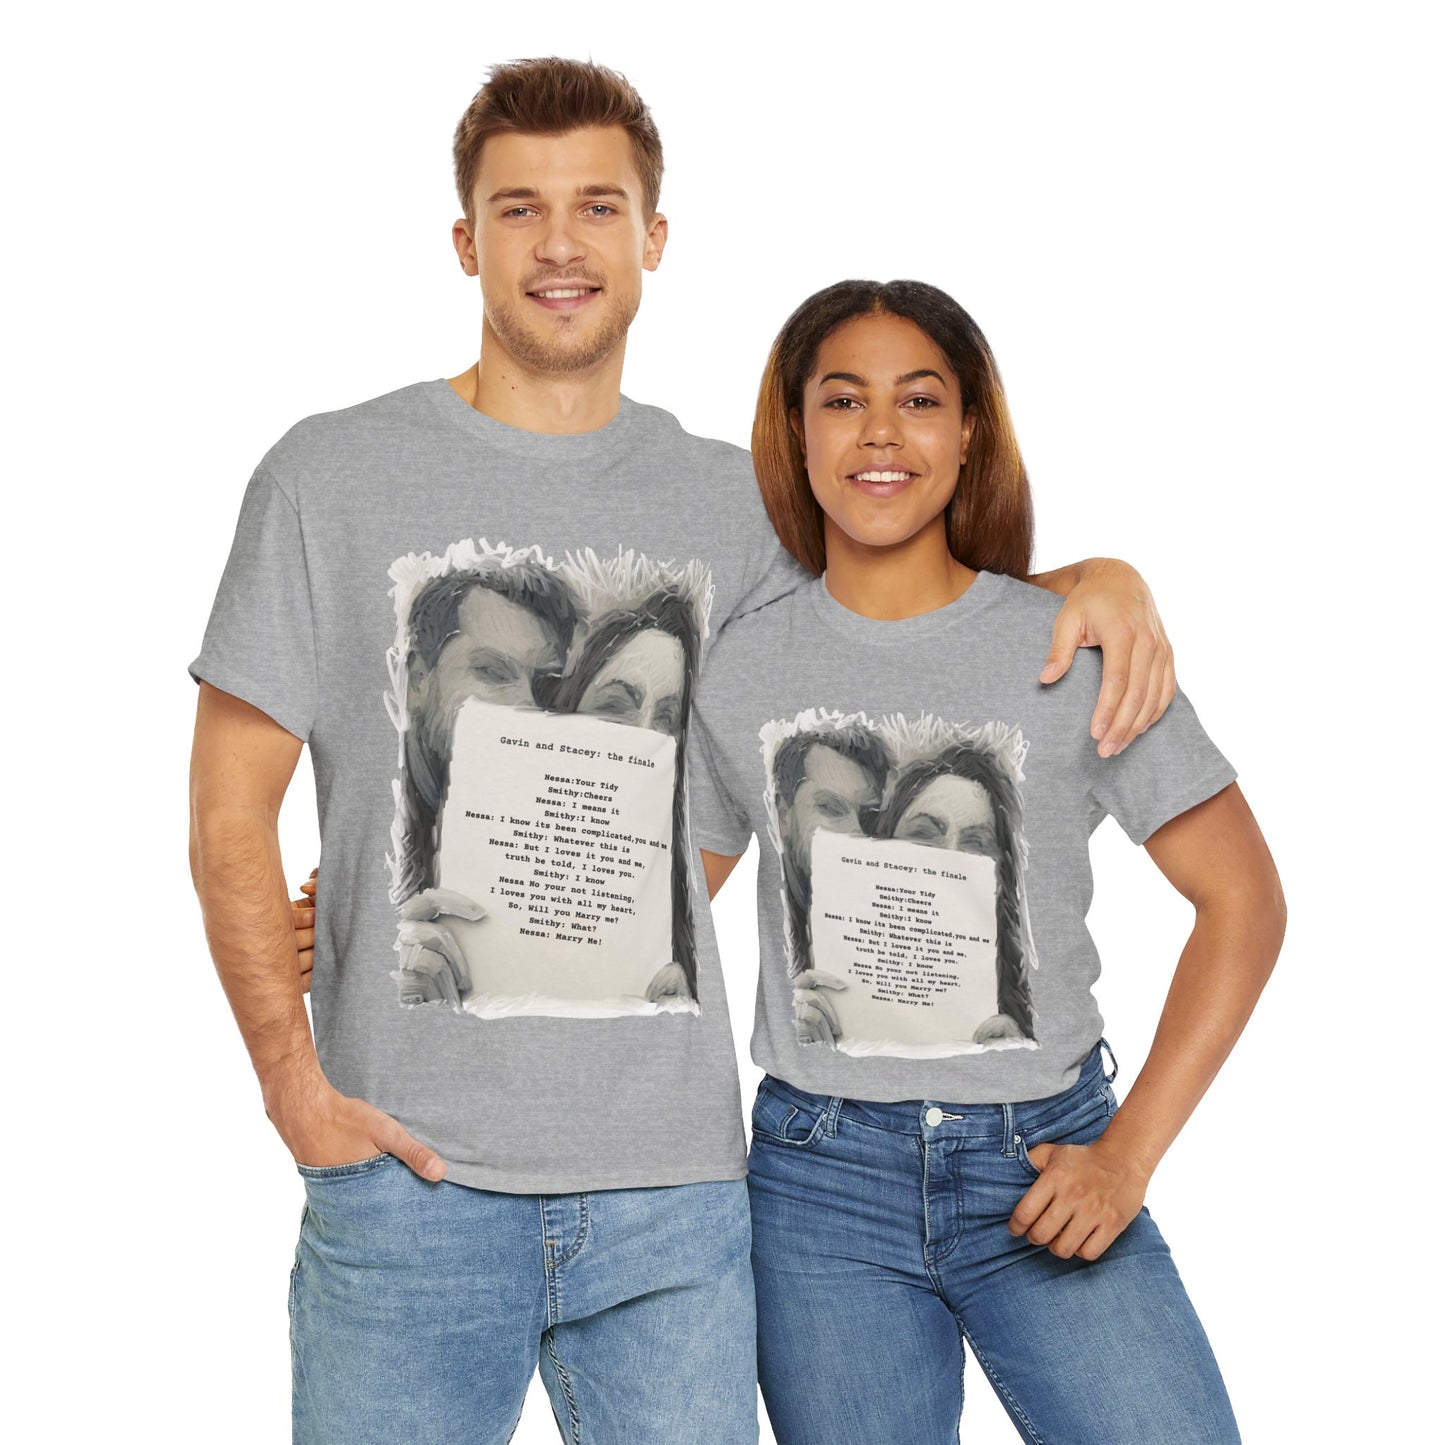 Will You Marry Me?" Gavin and Stacey Proposal T-shirt